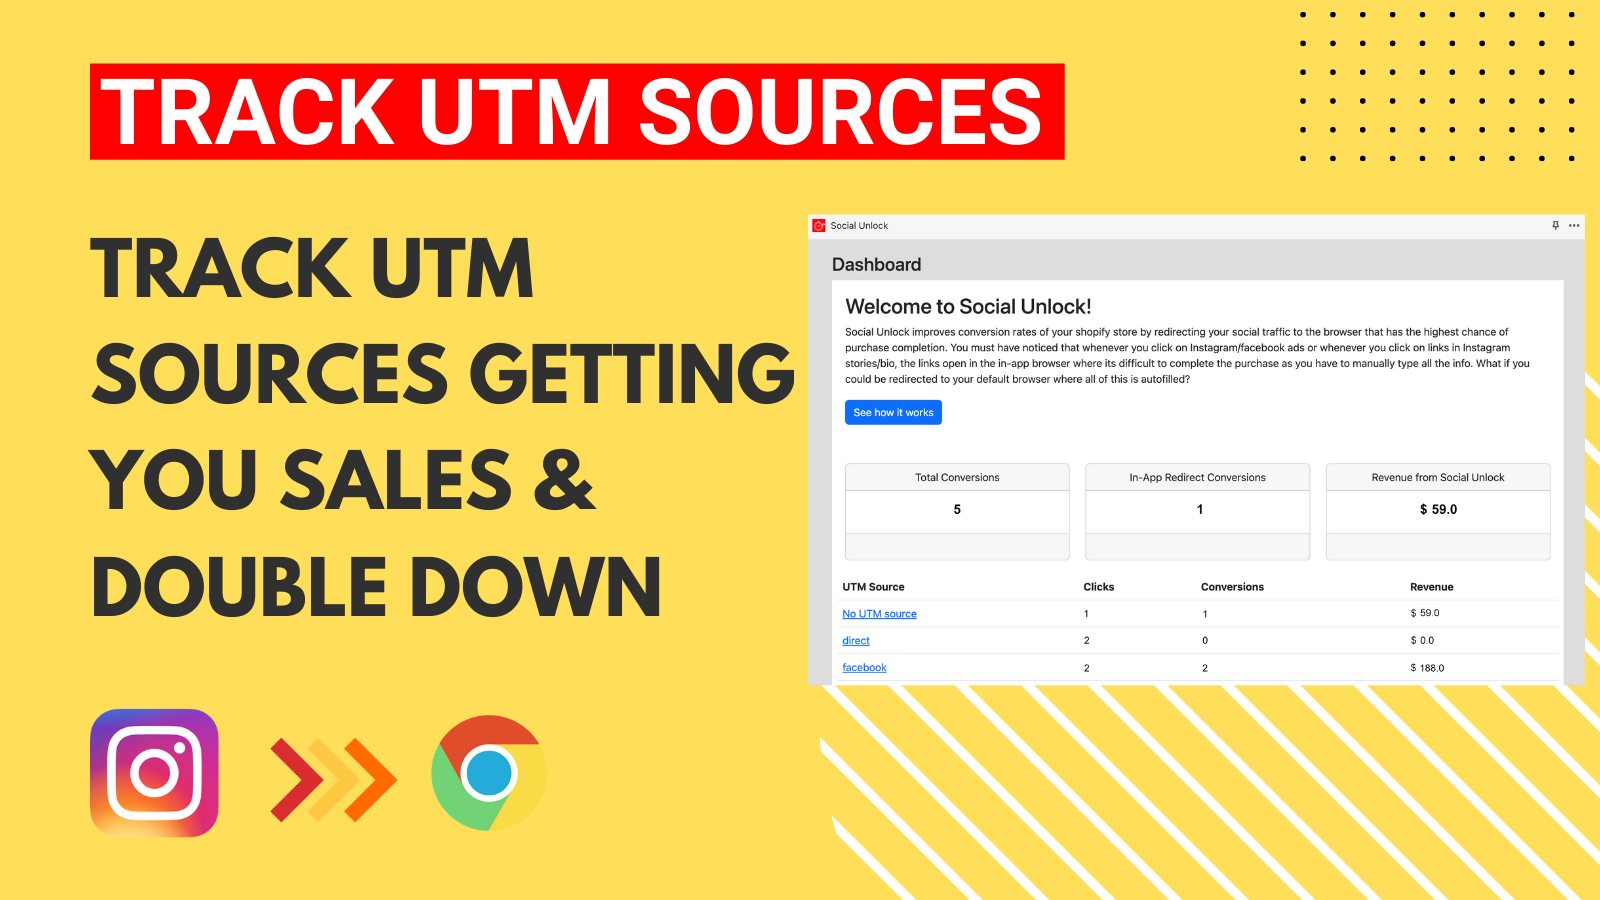 Track UTM Sources by Revenue